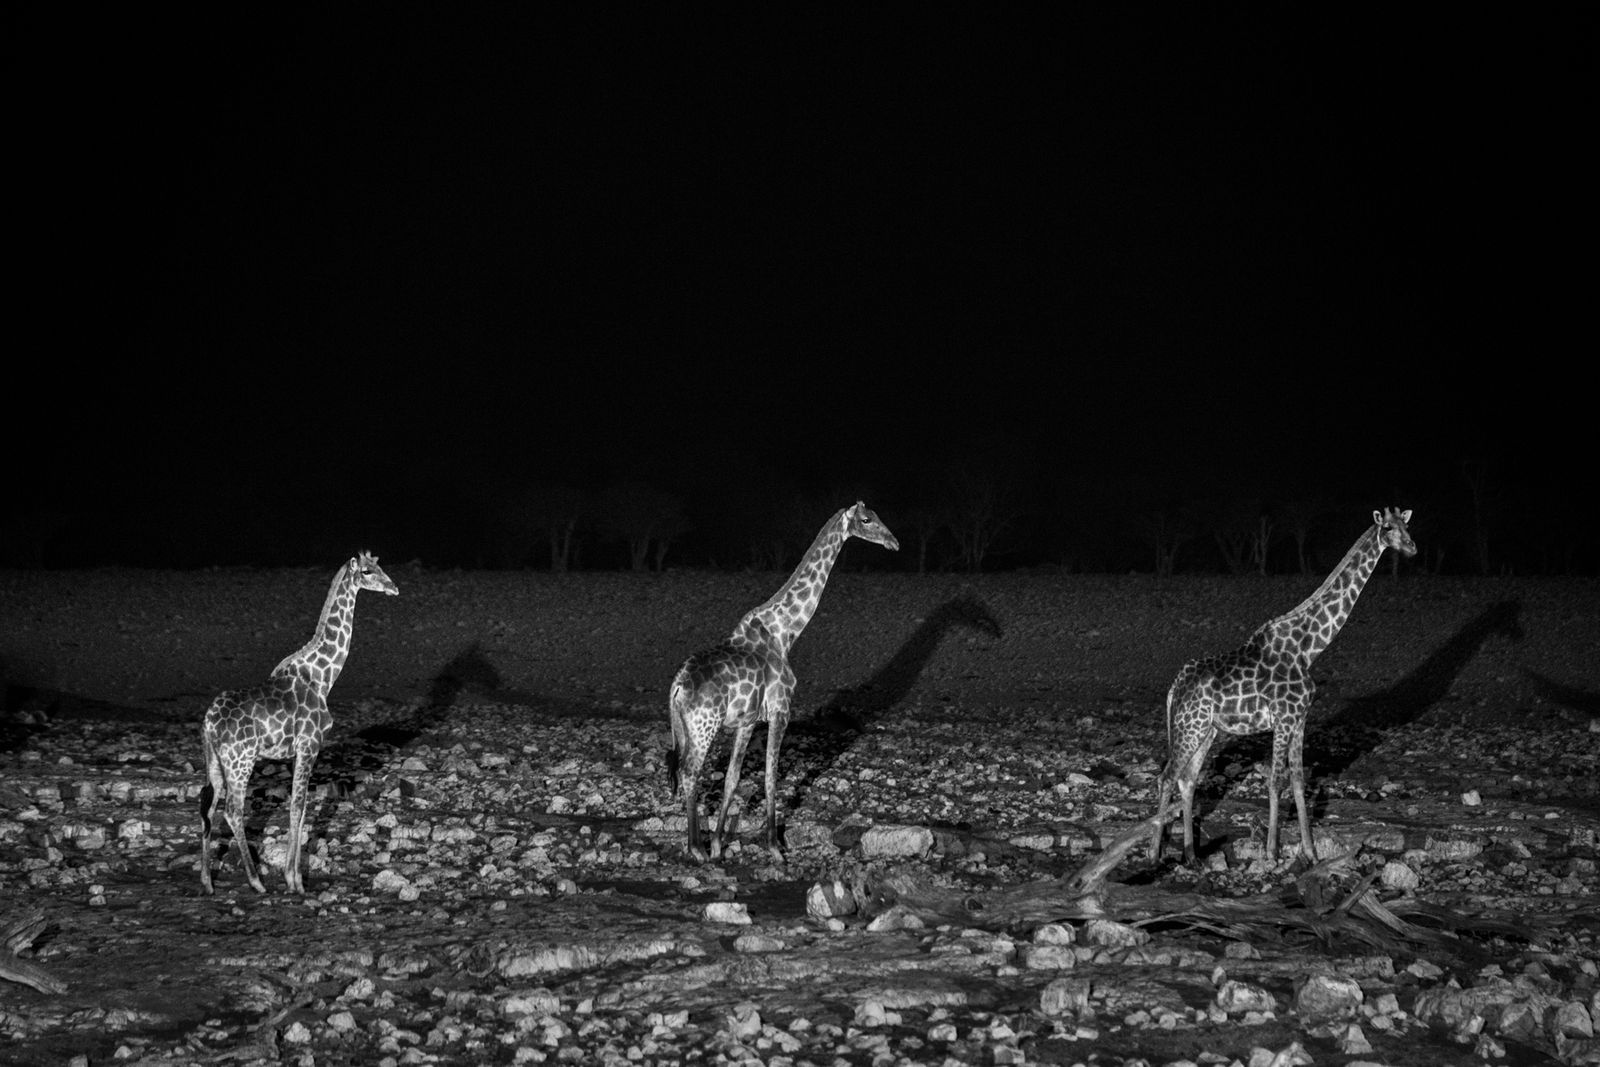 © Federico Pardo - Image from the the Watering hole photography project